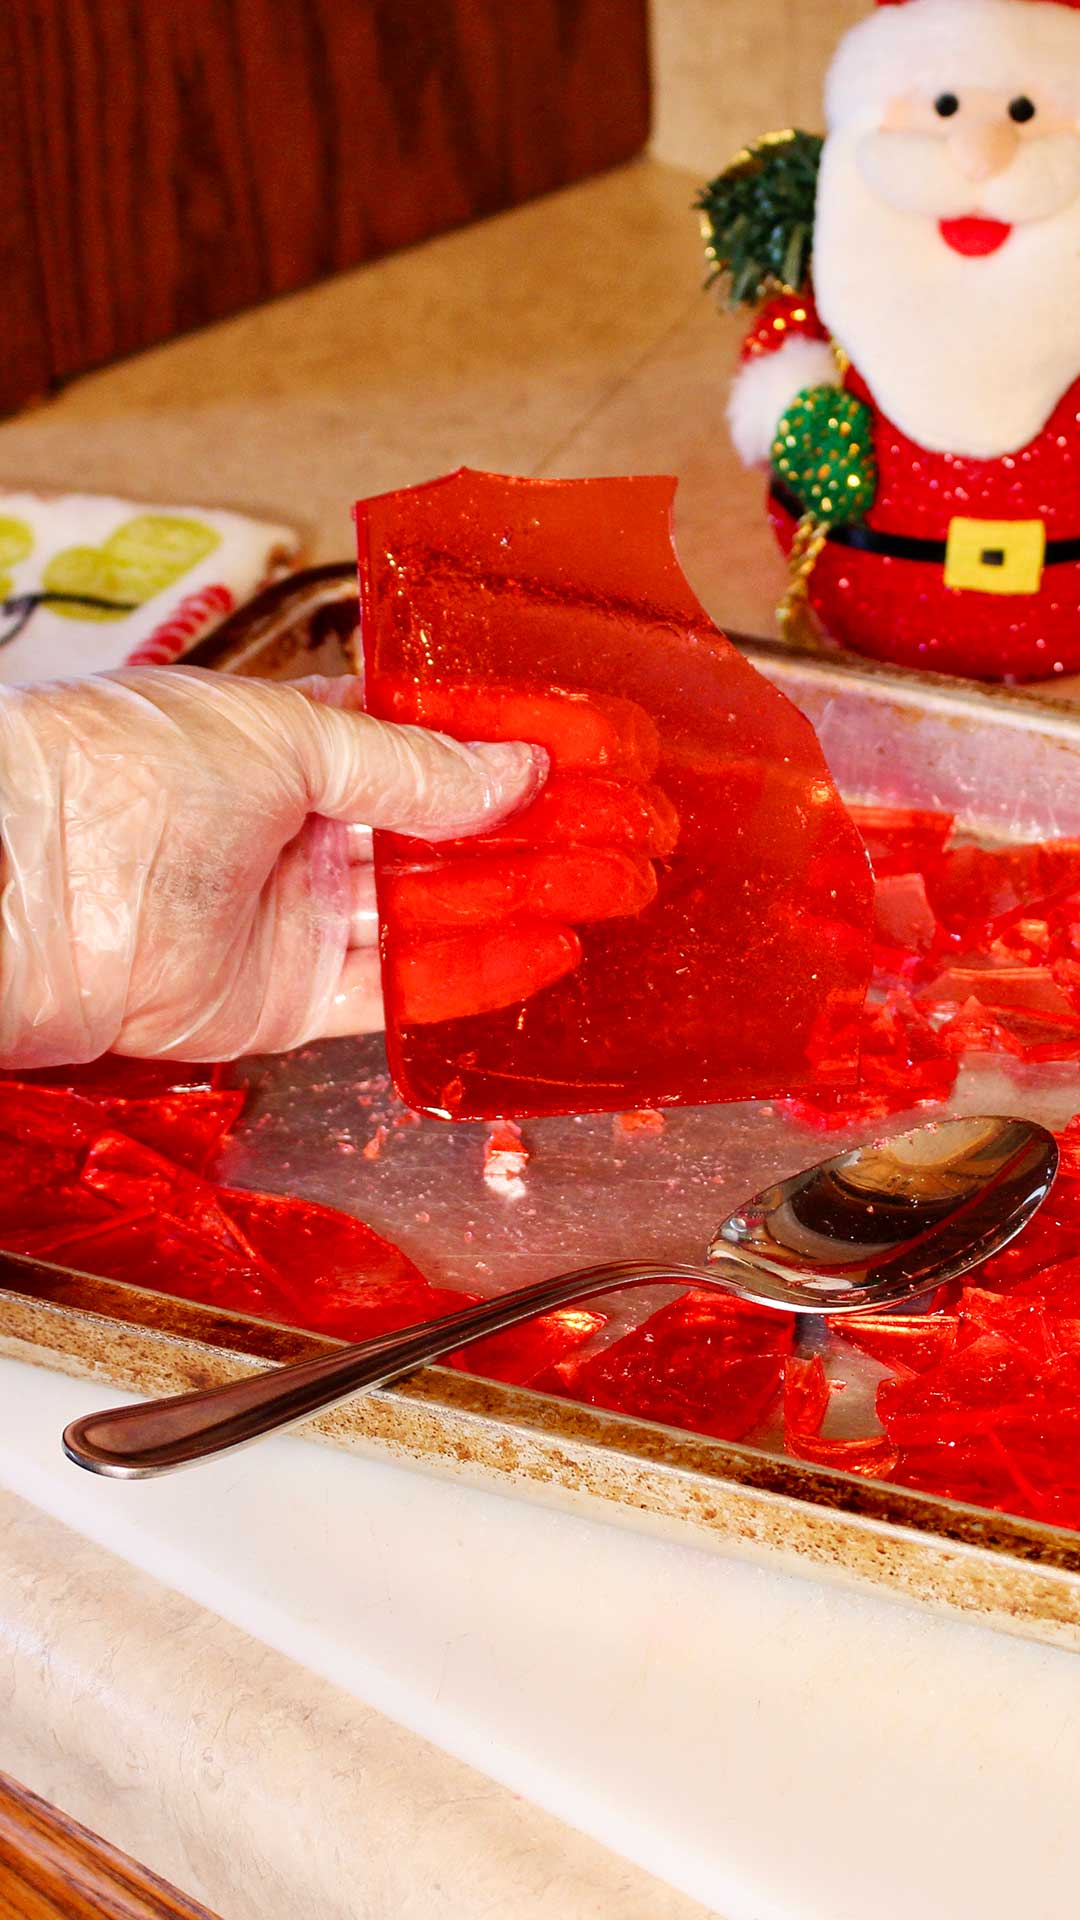 Hand holding large piece of broken homemade cinnamon candy with a Santa decoration in the background.